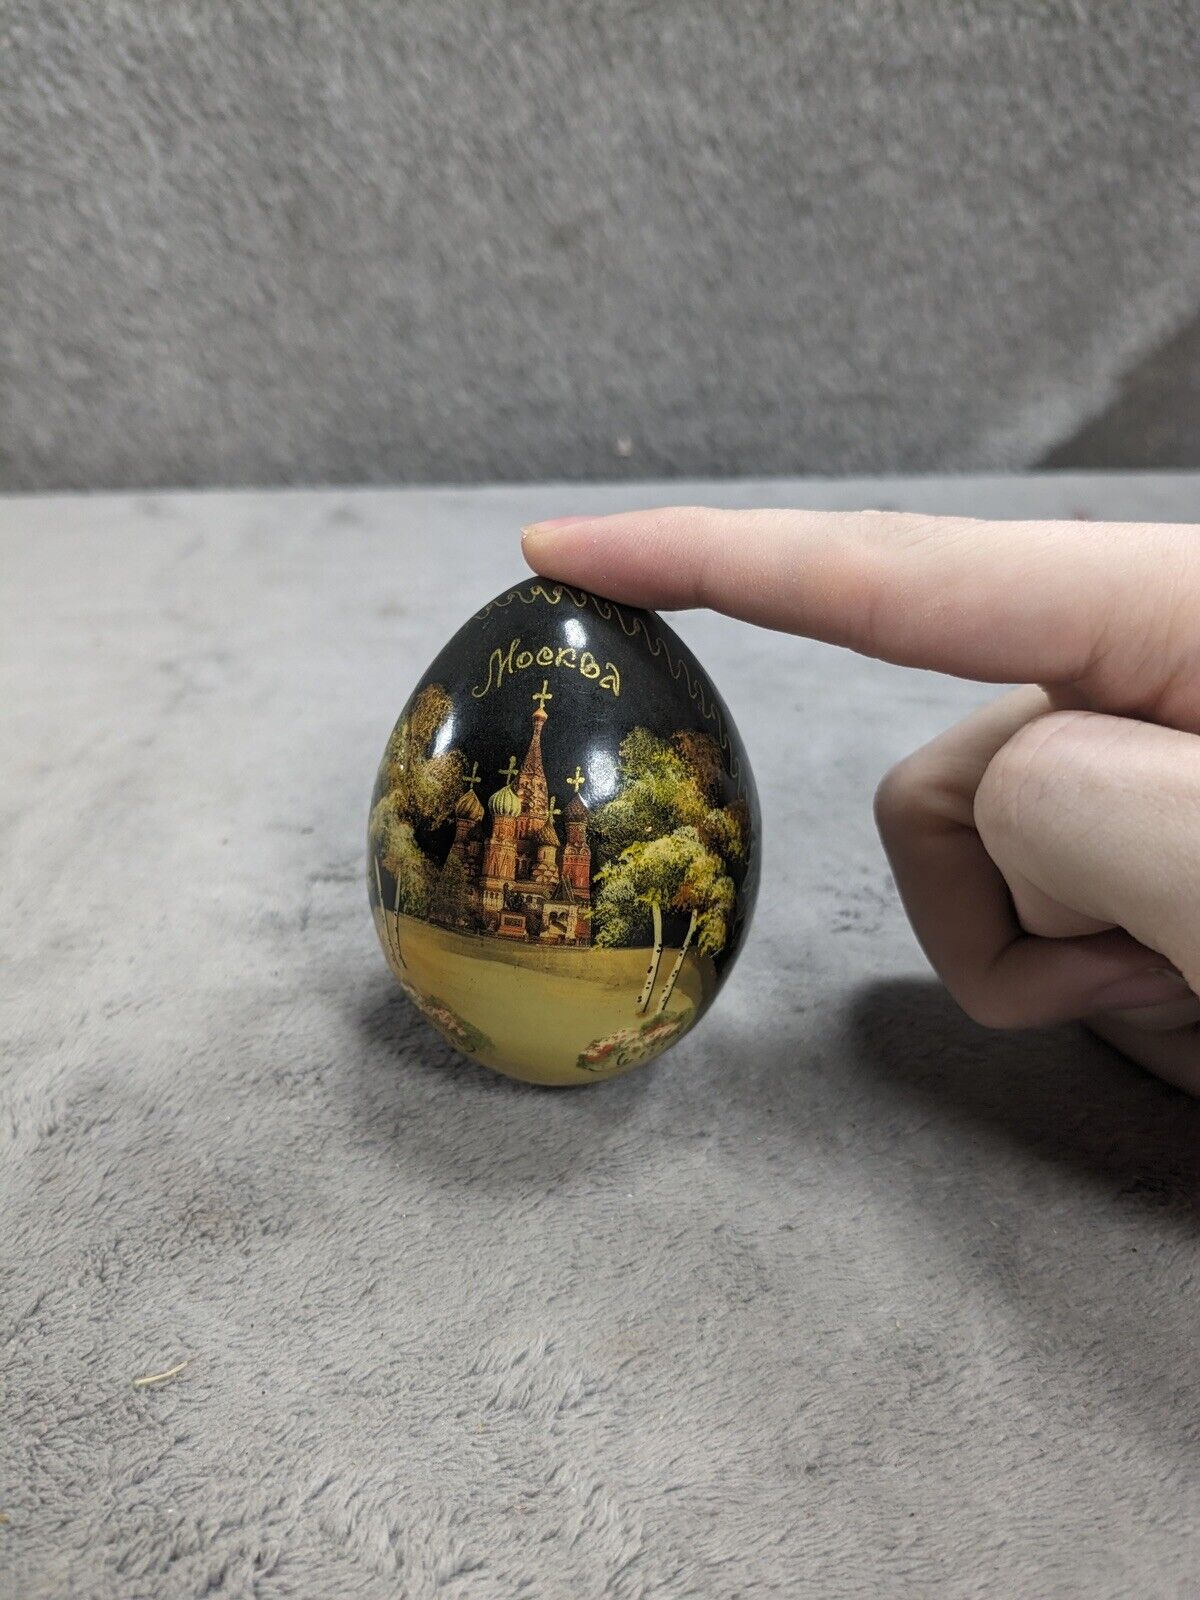 vintage painted egg Russian Russia Moscow souvenir lacquer building wood art 3”